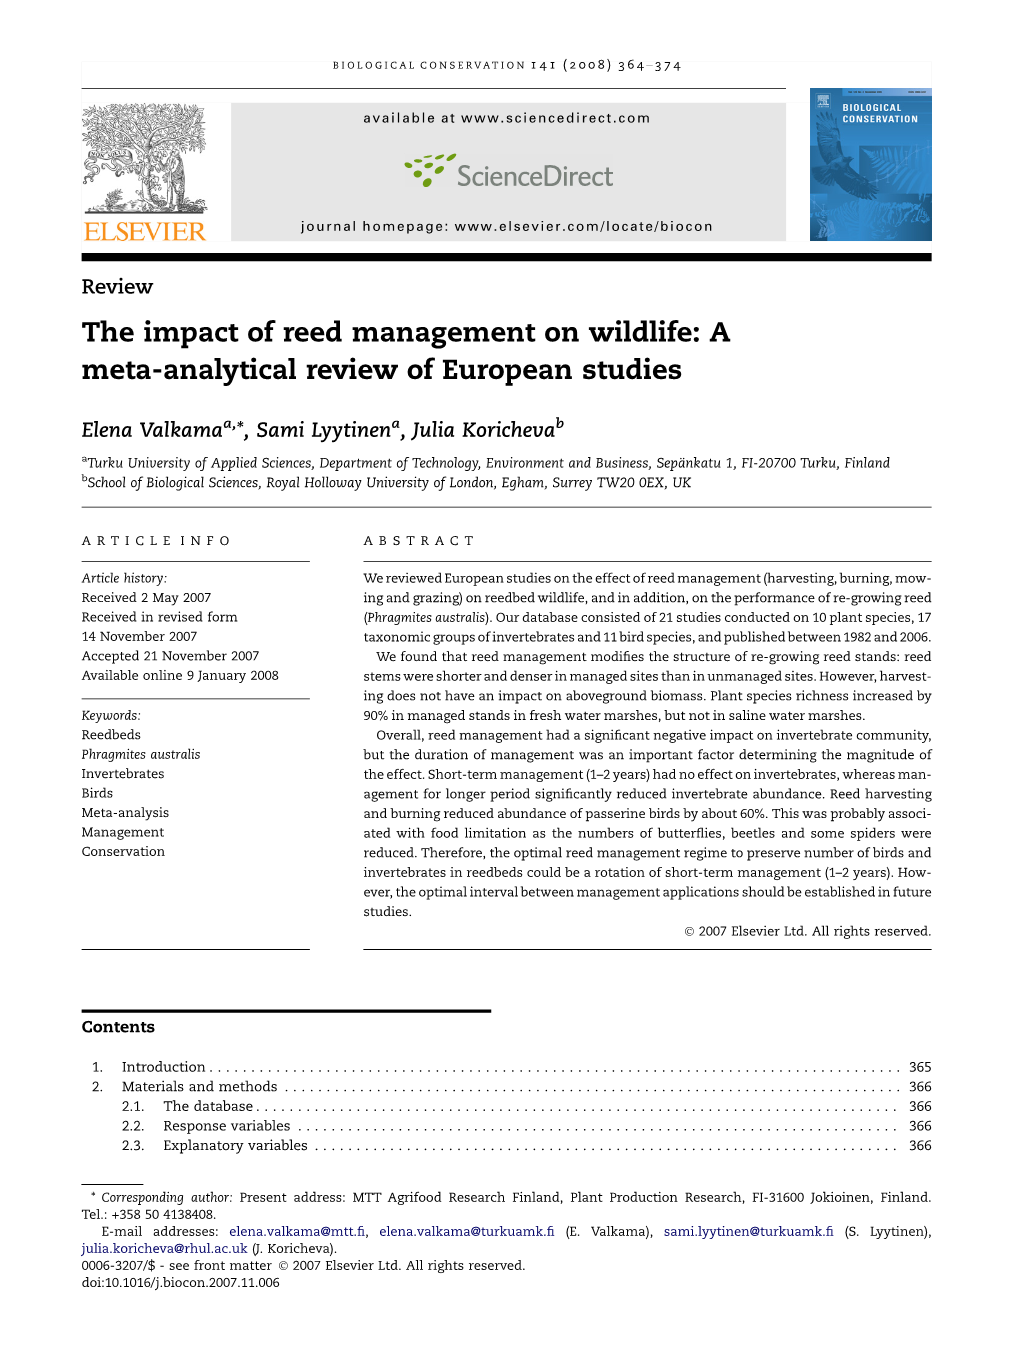 The Impact of Reed Management on Wildlife: a Meta-Analytical Review of European Studies